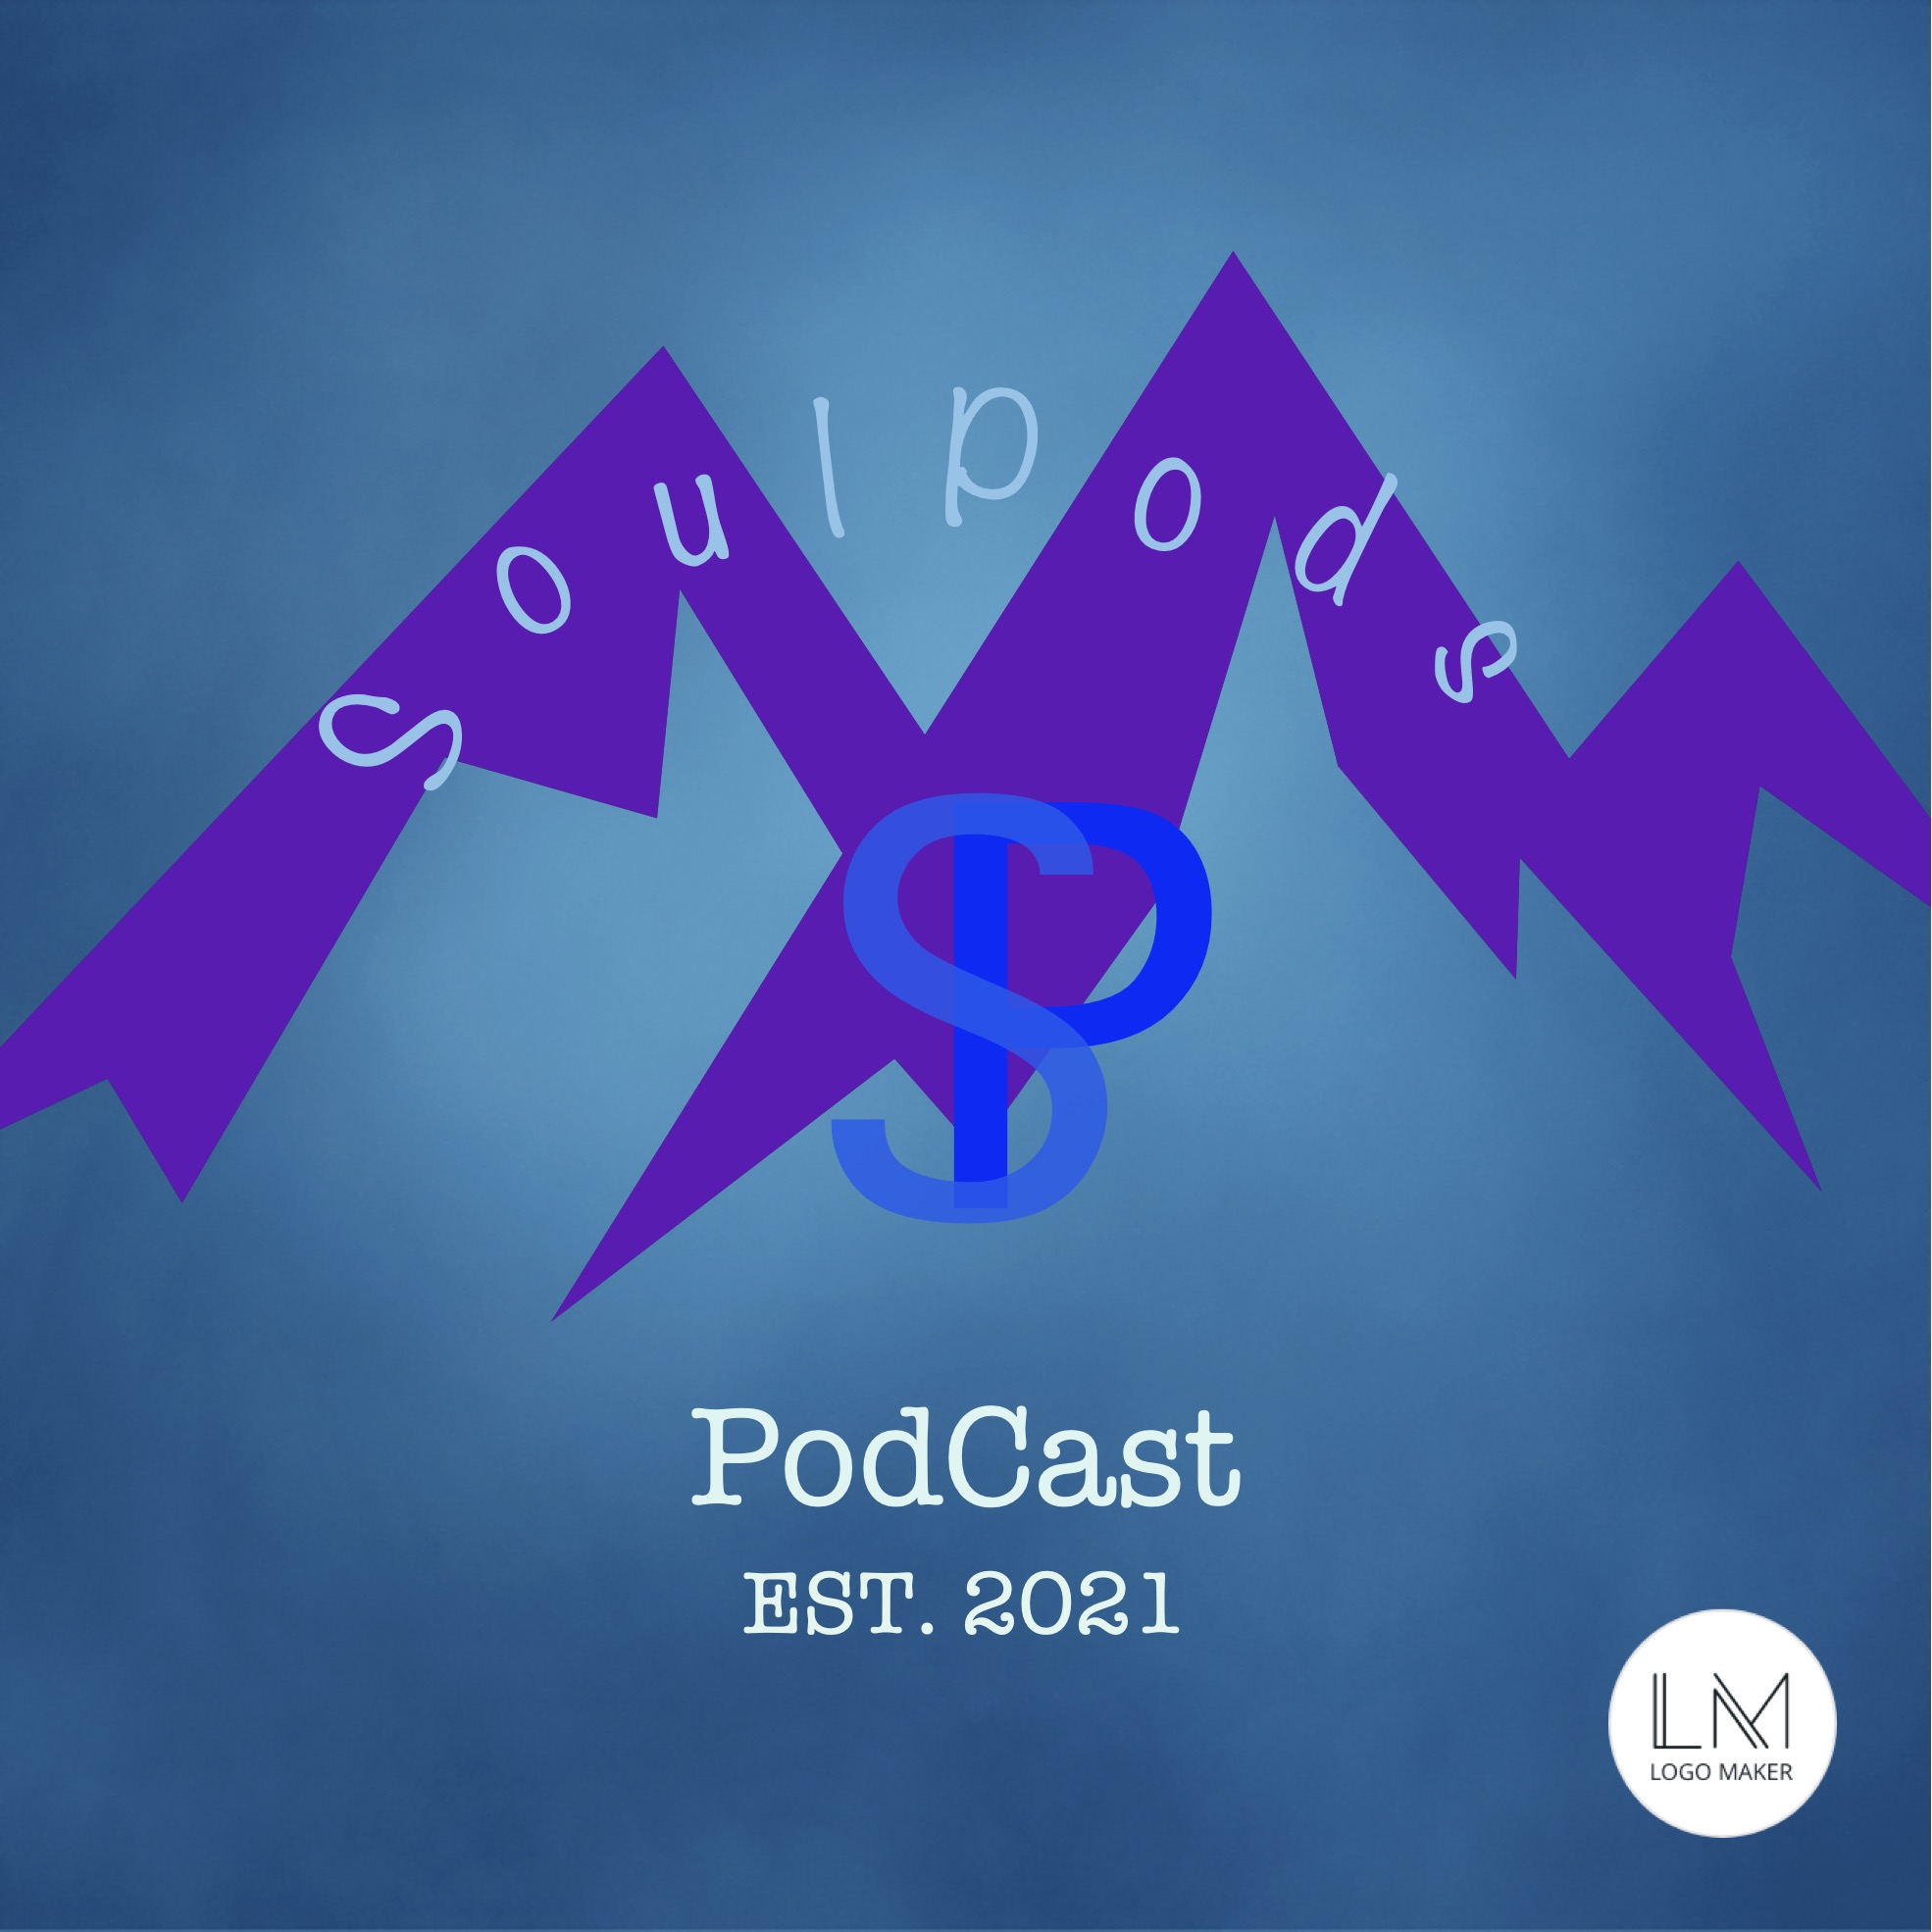 Soulpods Podcast